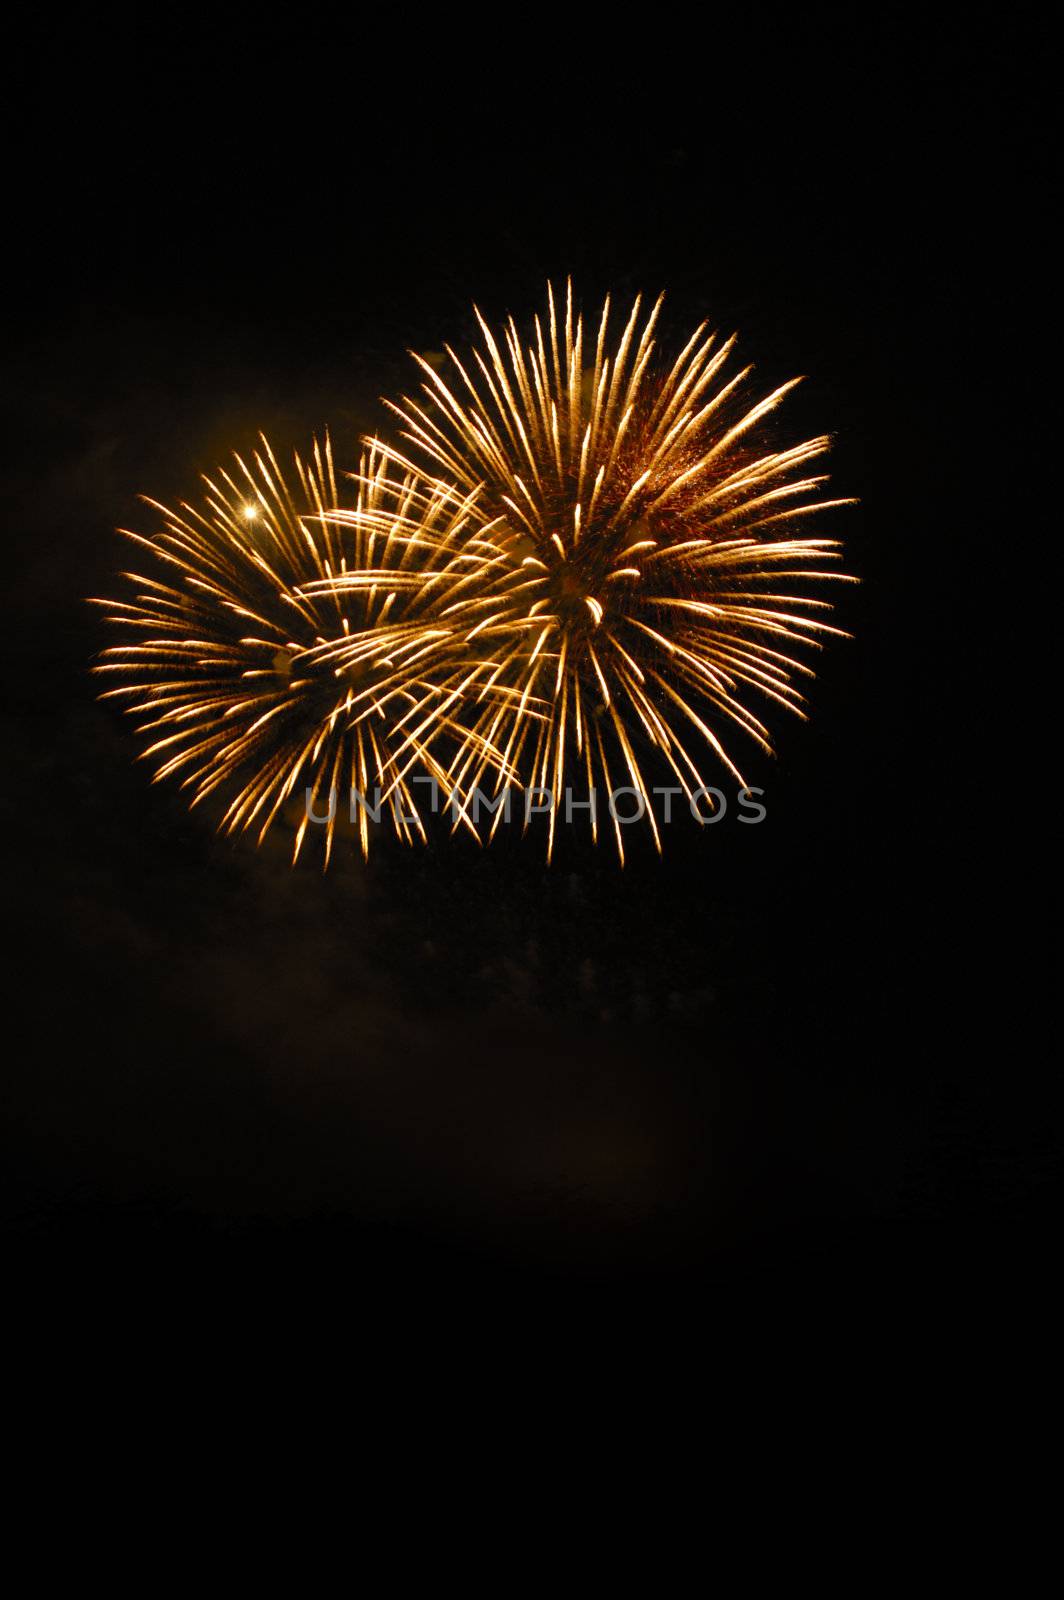 Two firework bursts isolated in the night sky. Space for text.